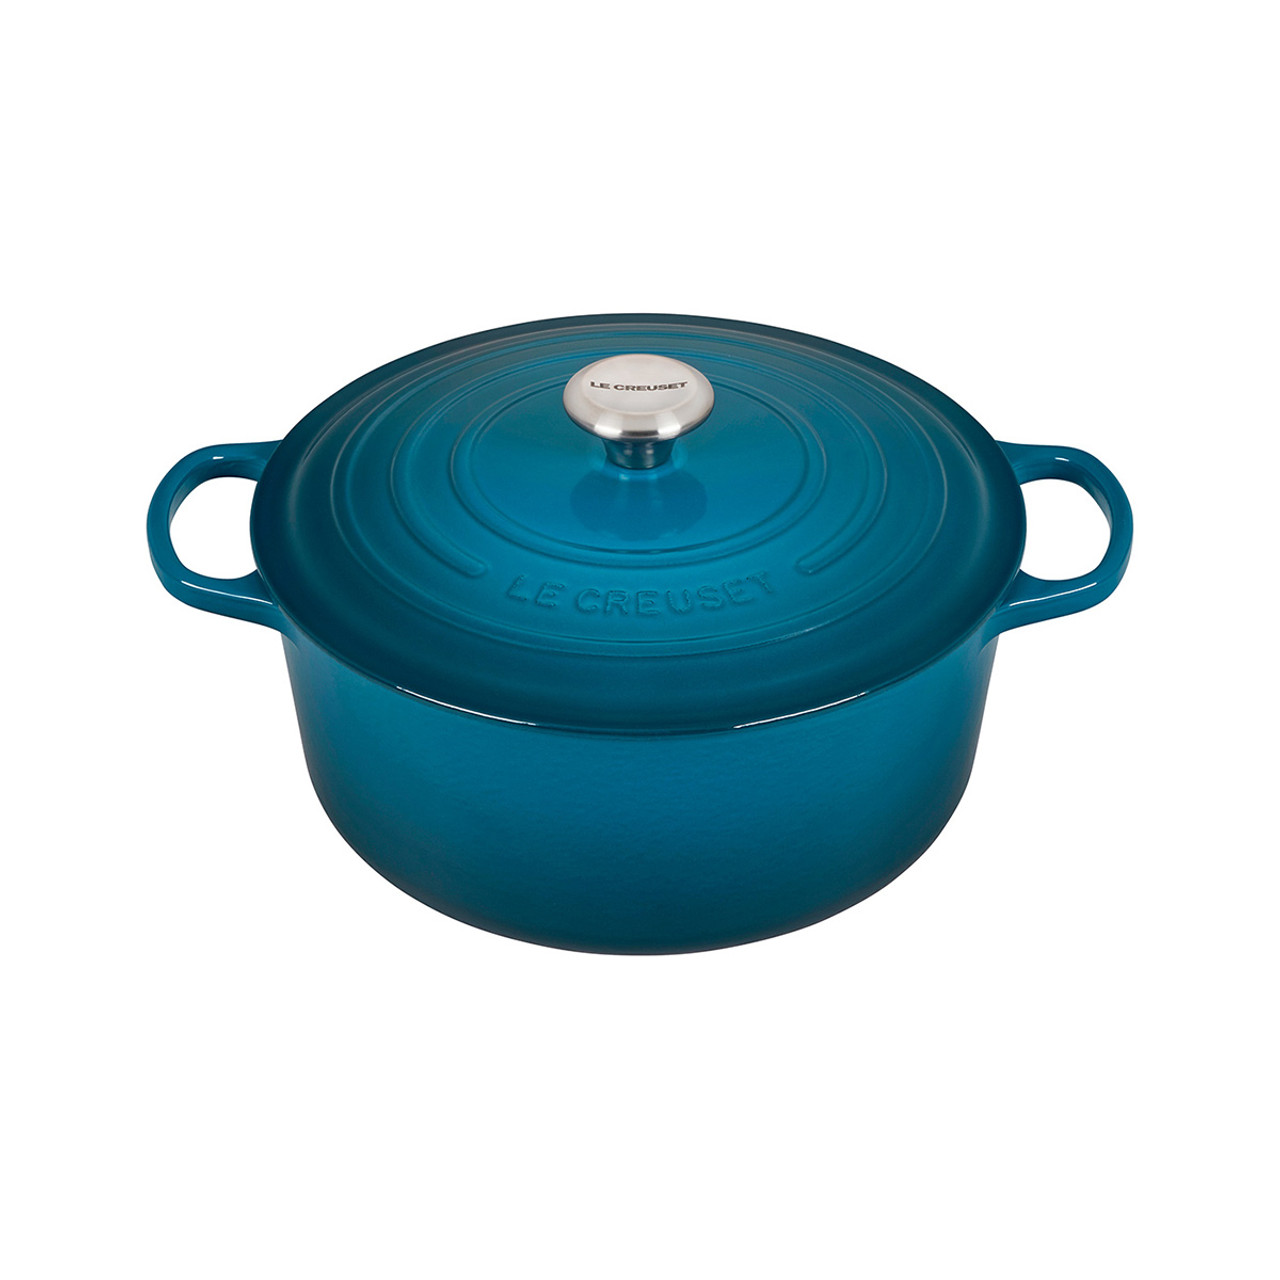 Le Creuset Jelly Roll Pan